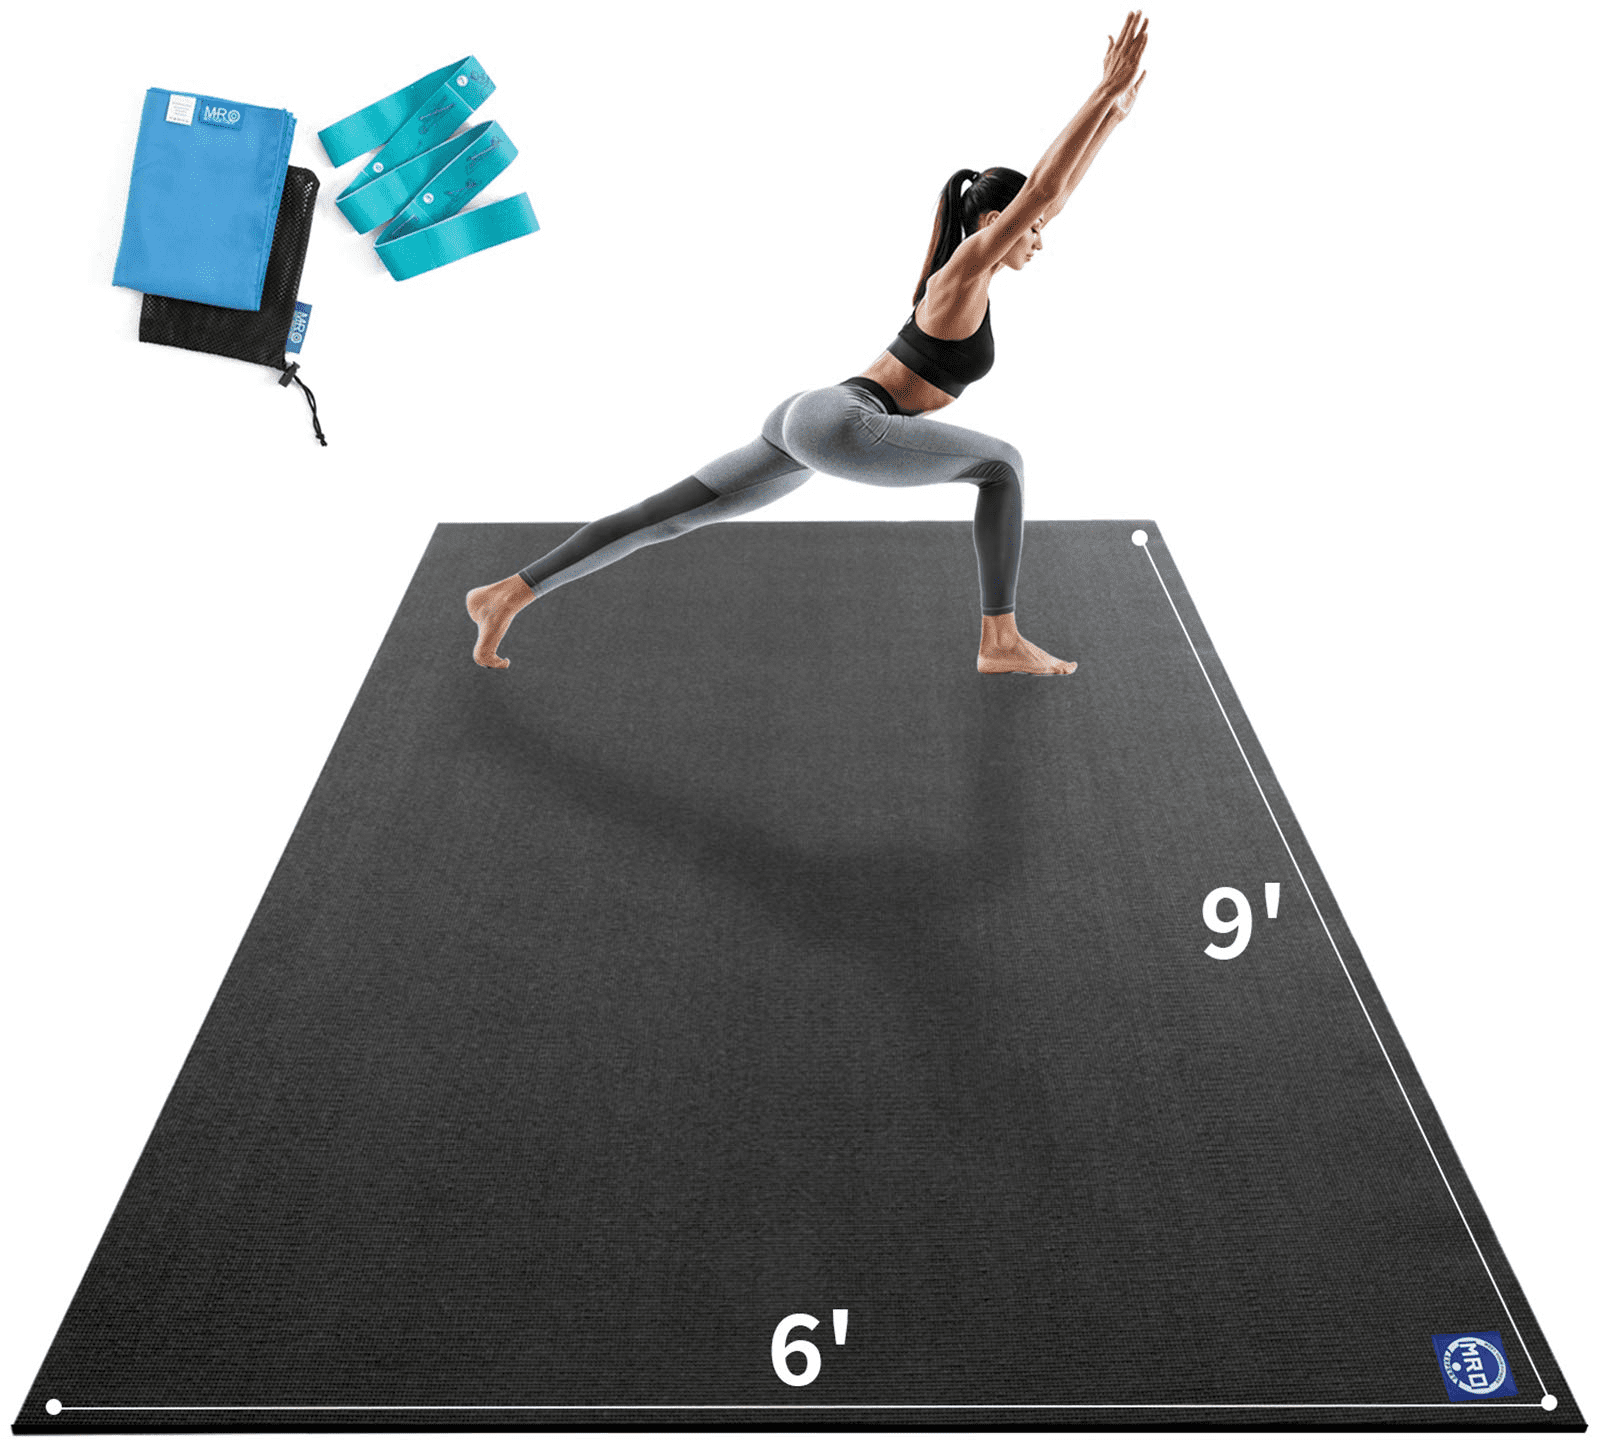 Premium Large Yoga Mat 9'x6'x9mm, Extra Wide and Thick Exercise Mats for  Home Gym Workout, Move Freedom, Non-Slip, Soft for Women and Men Fitness,  Eco-Friendly, Barefoot Only,108 x 72 